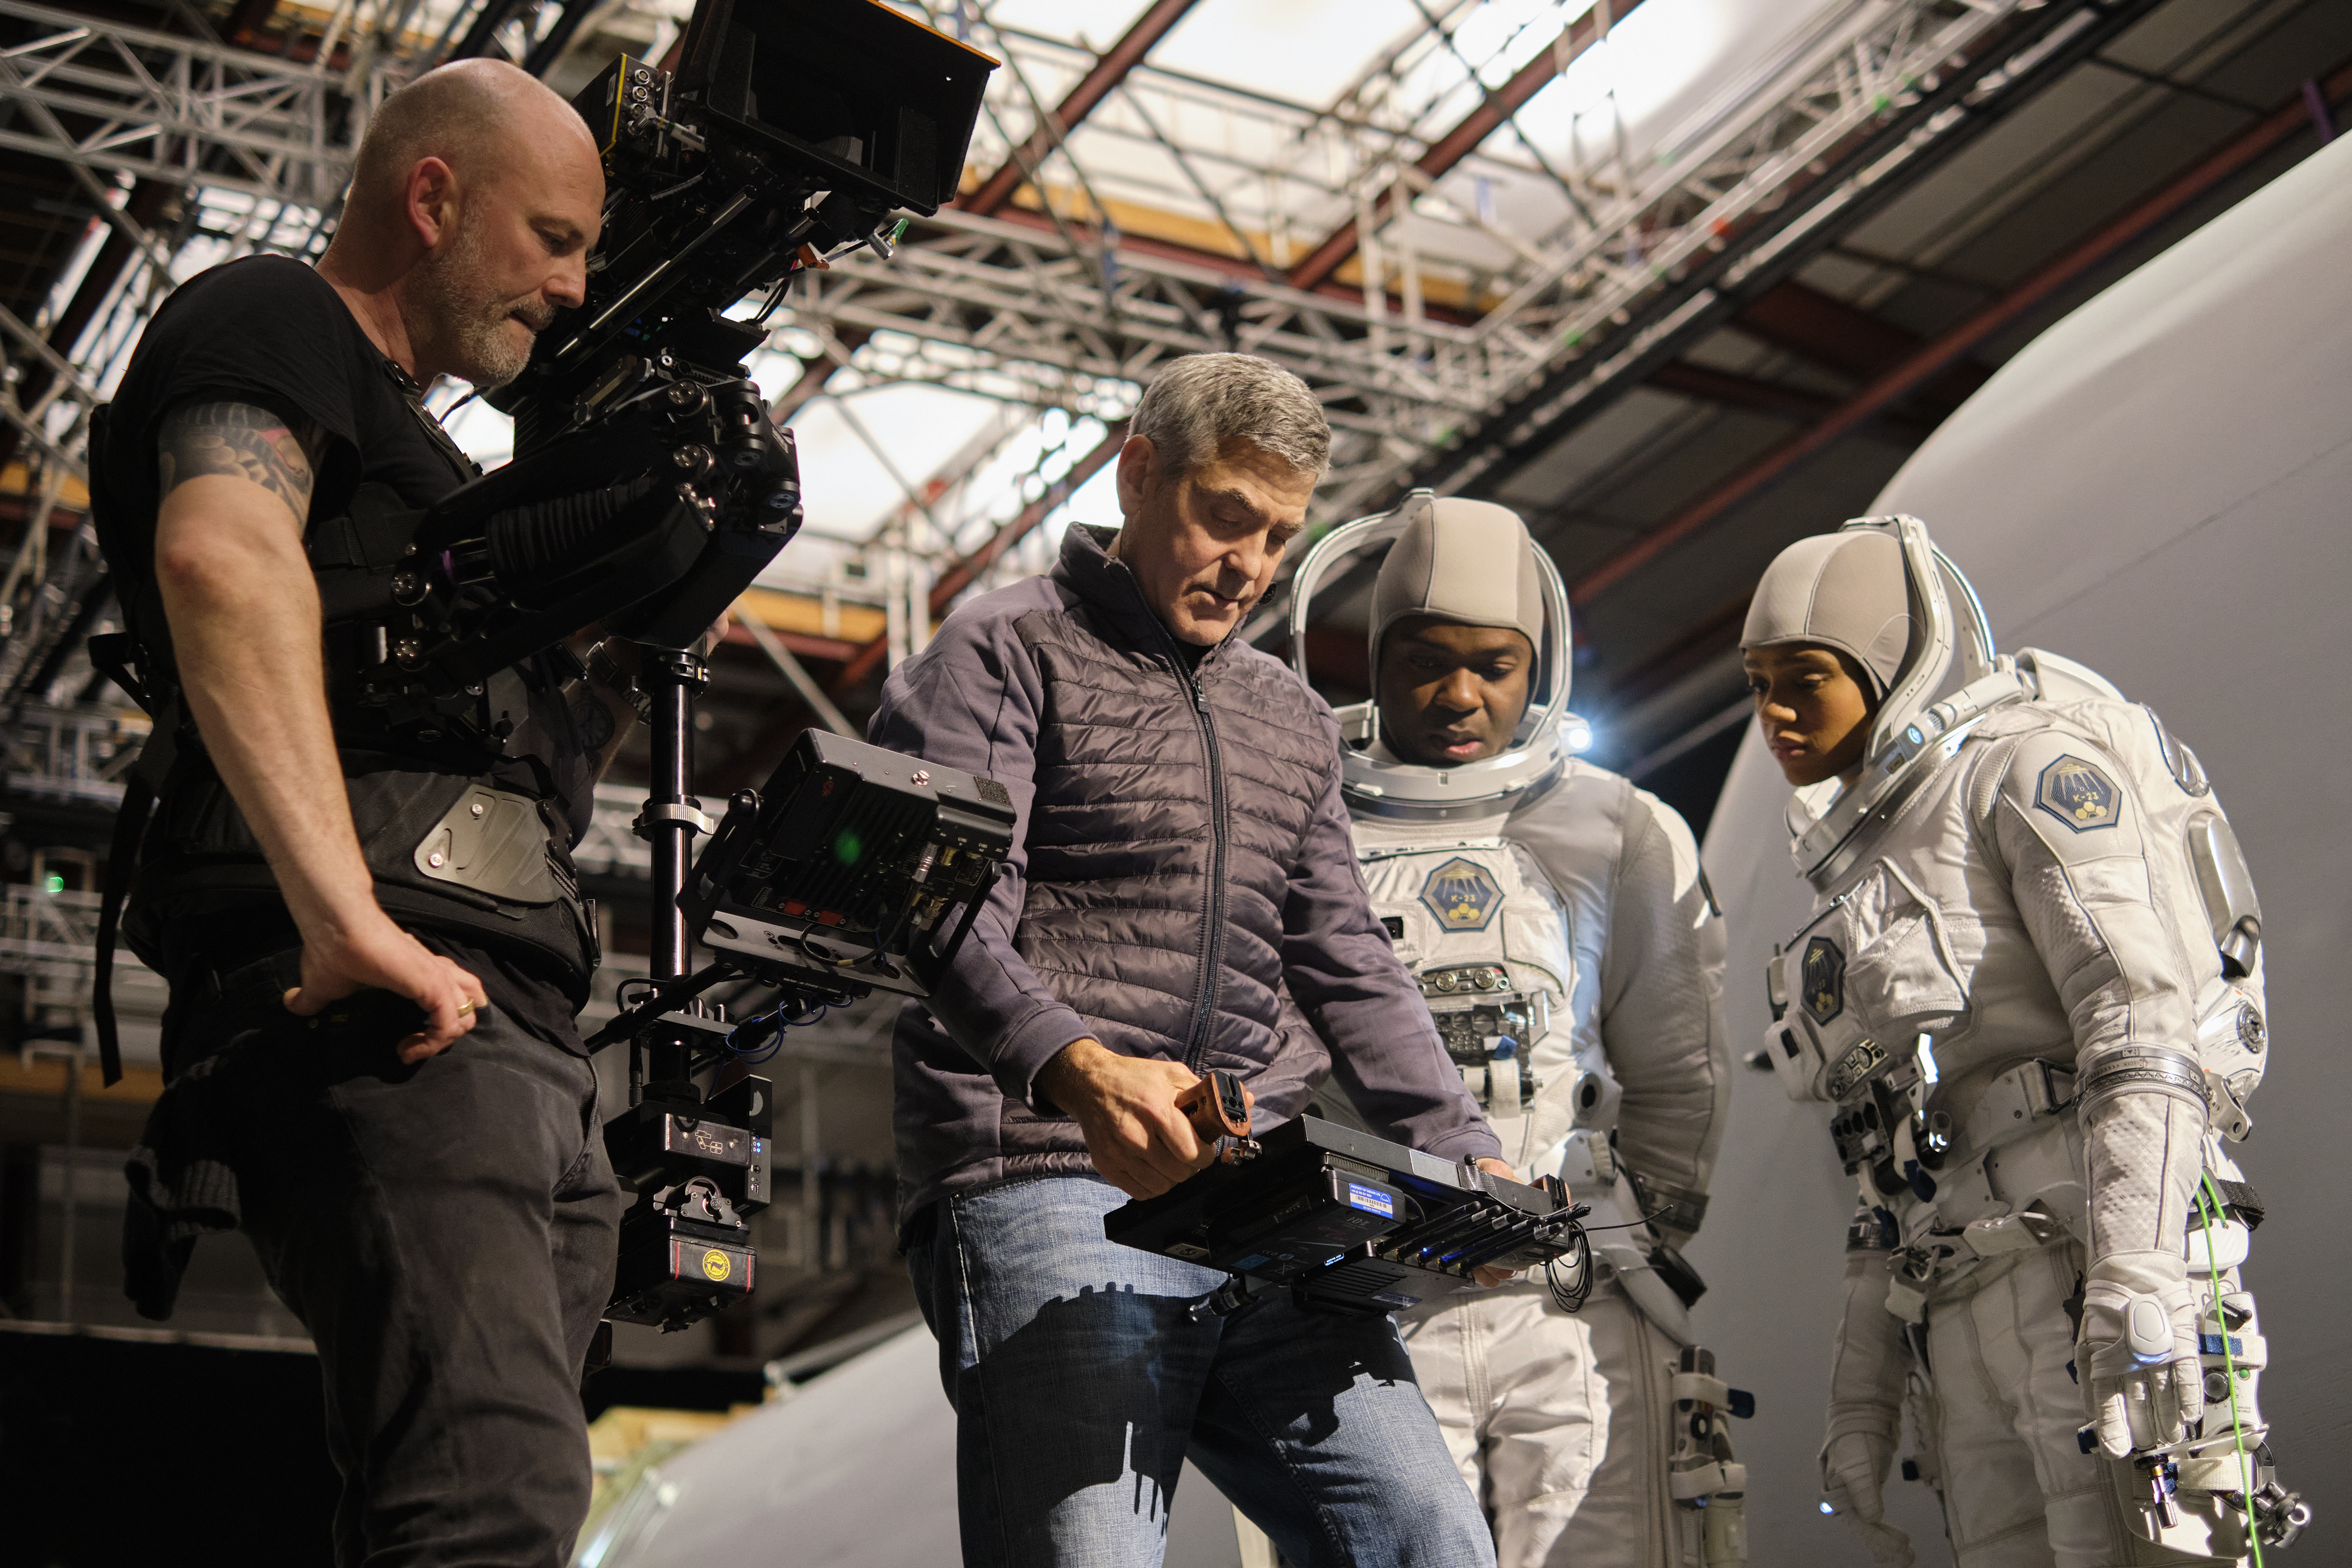 Director George Clooney, David Oyelowo and Tiffany Boone on the set of The Midnight Sky